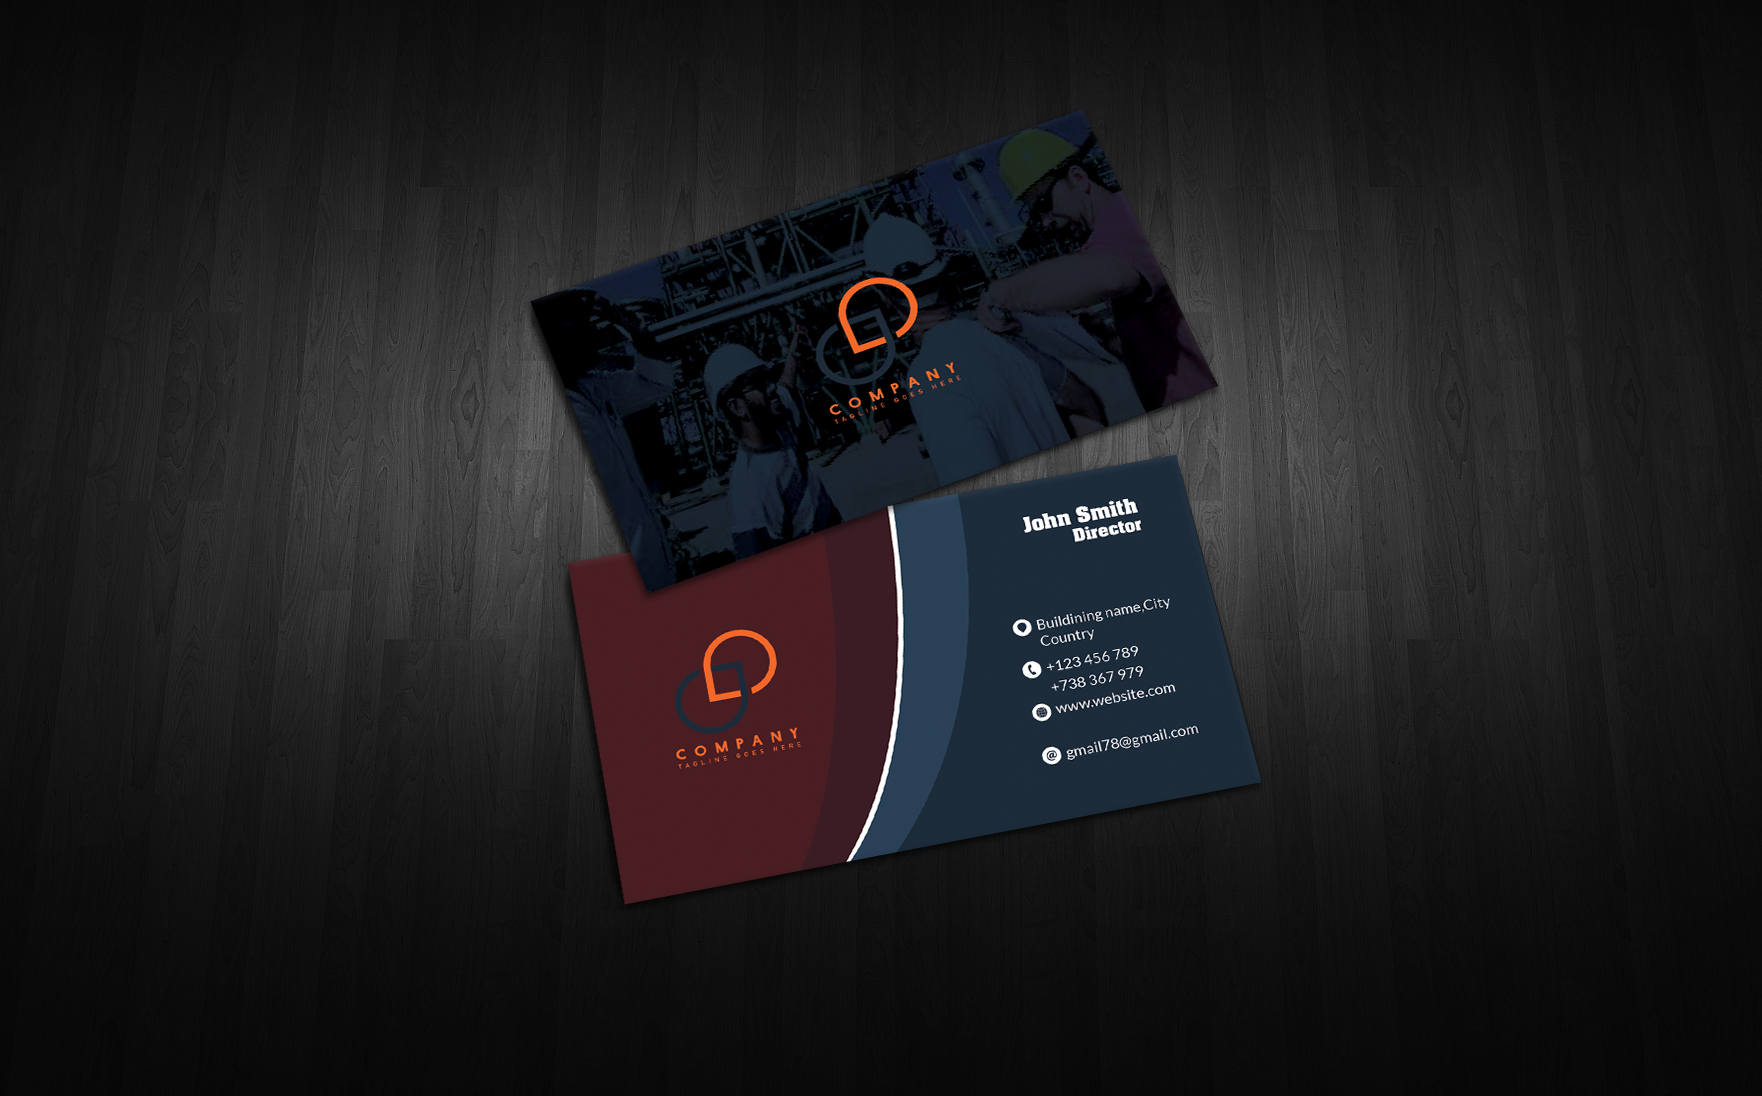  Corporate Business cards for you in just 6hours